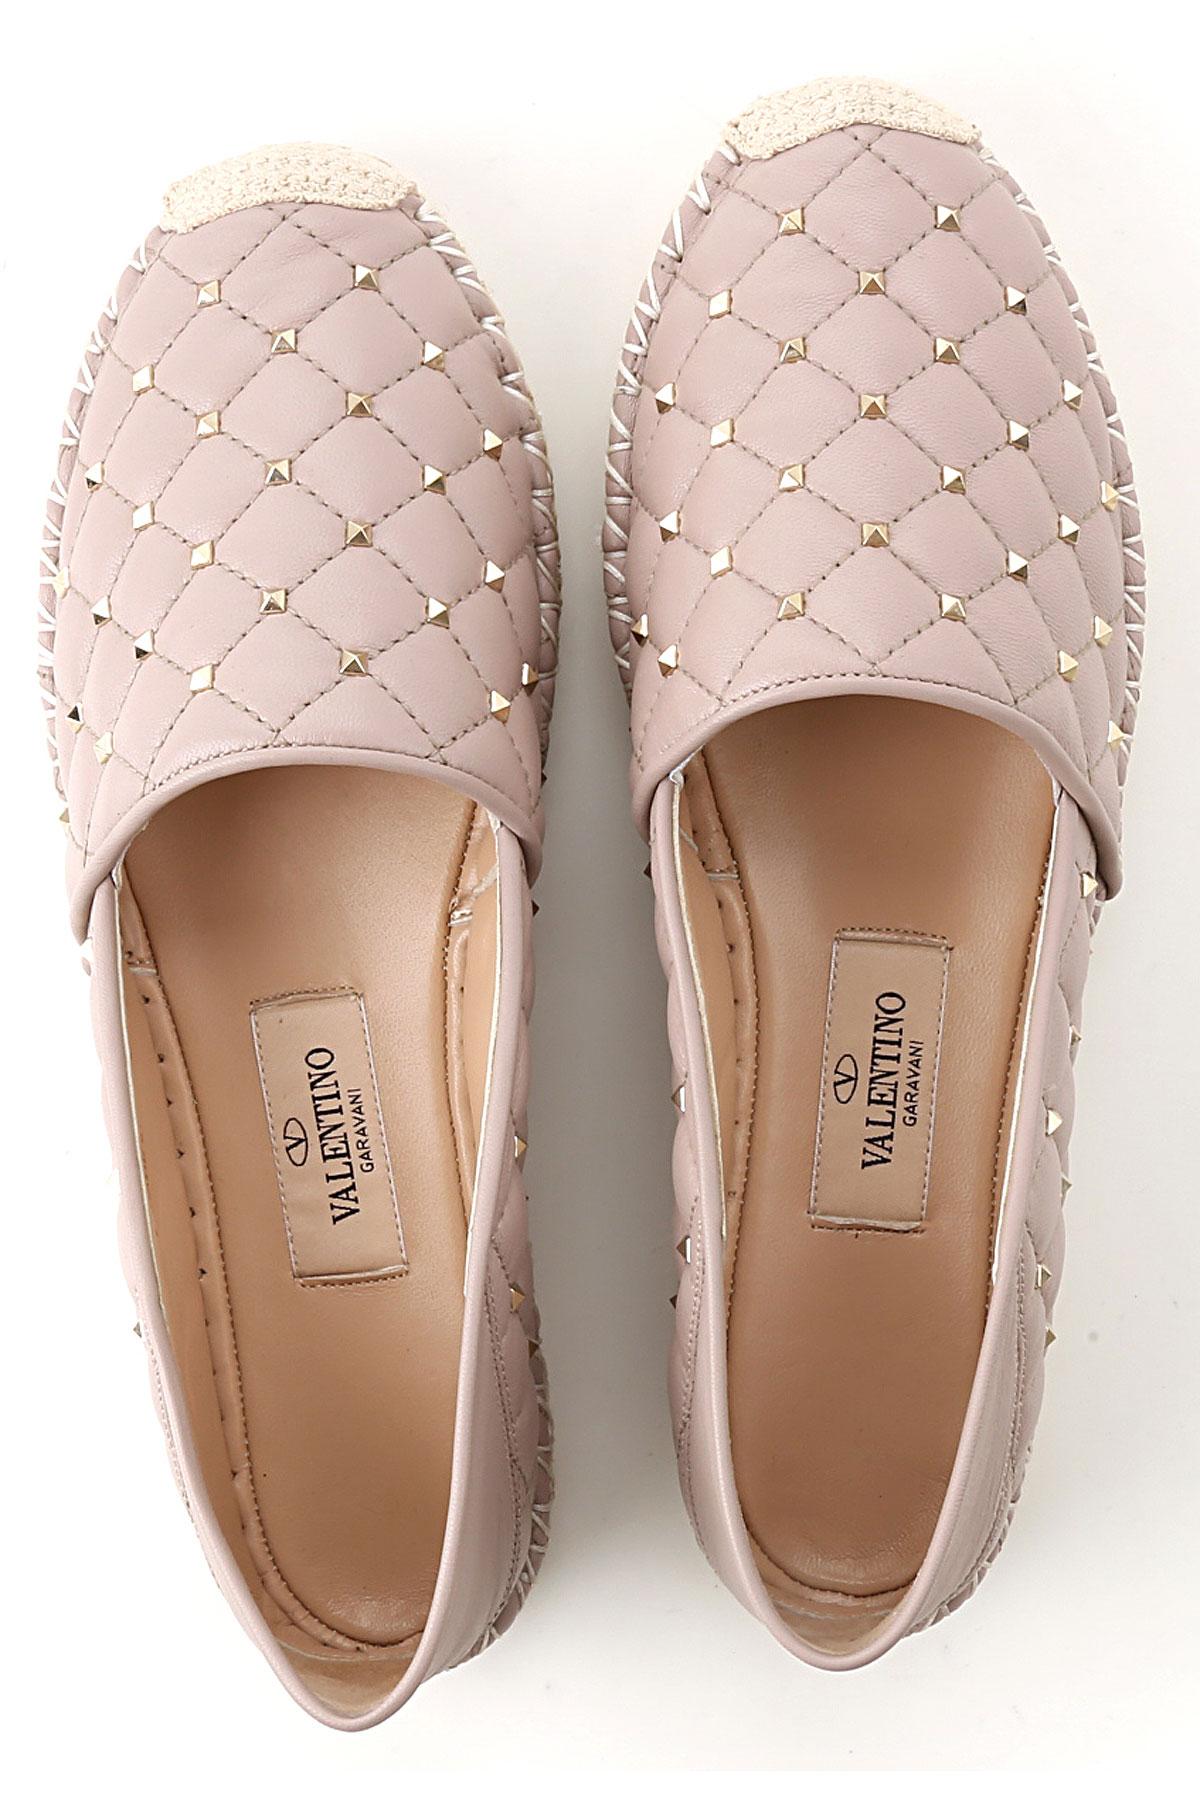 Valentino Slip On Sneakers For Women On Sale - Lyst